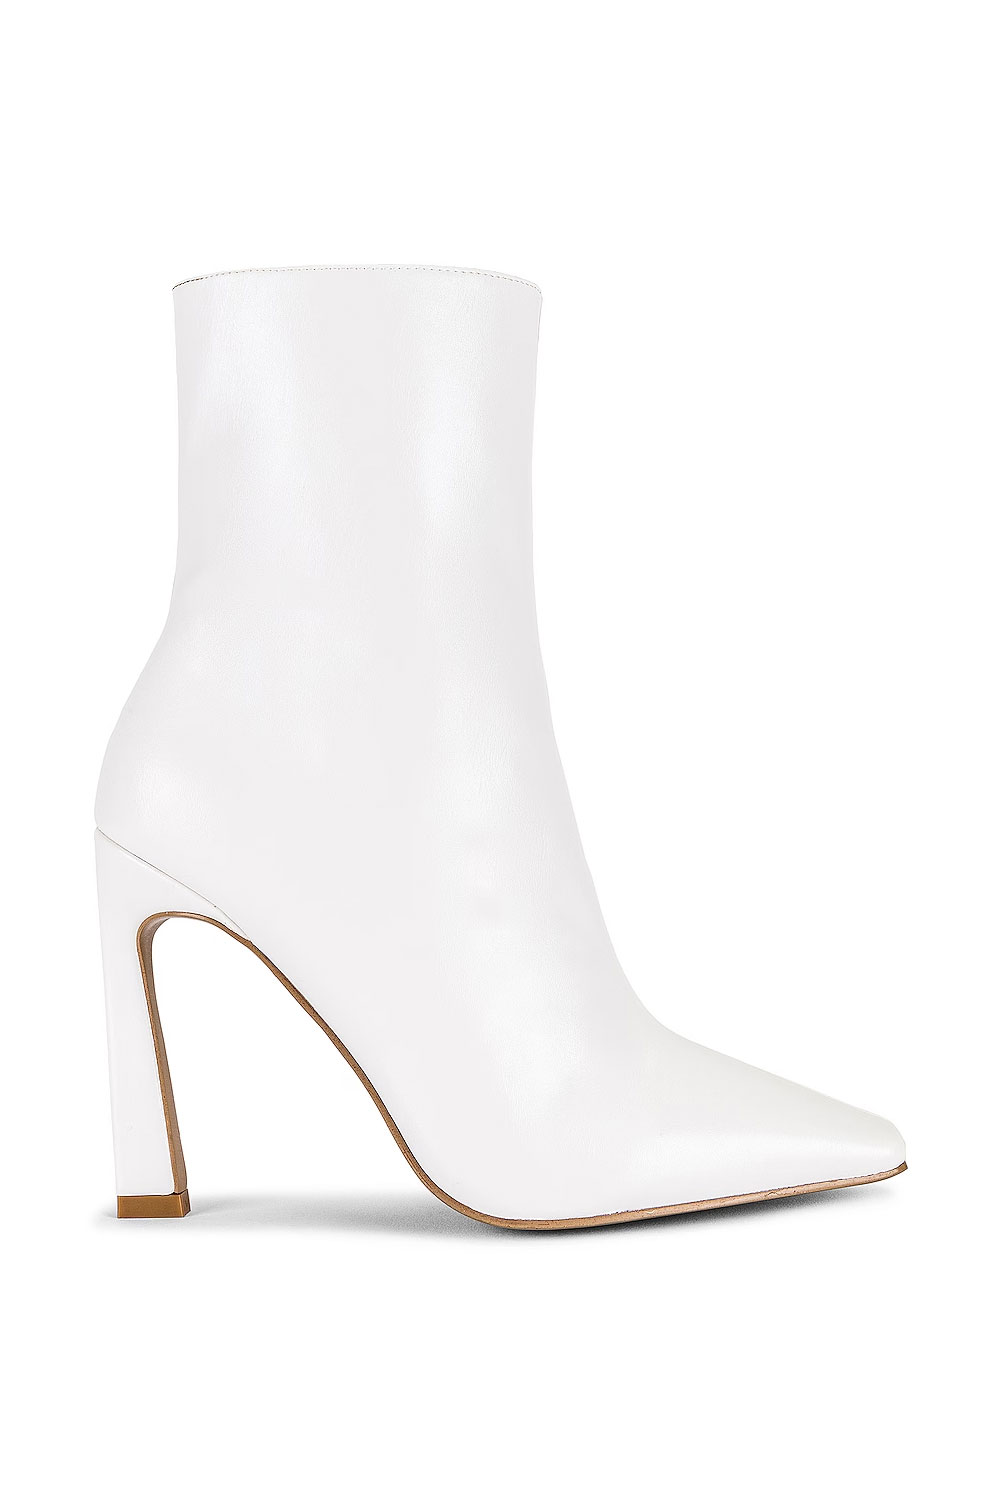 RAYE Lusty Boot - White ankle Boot